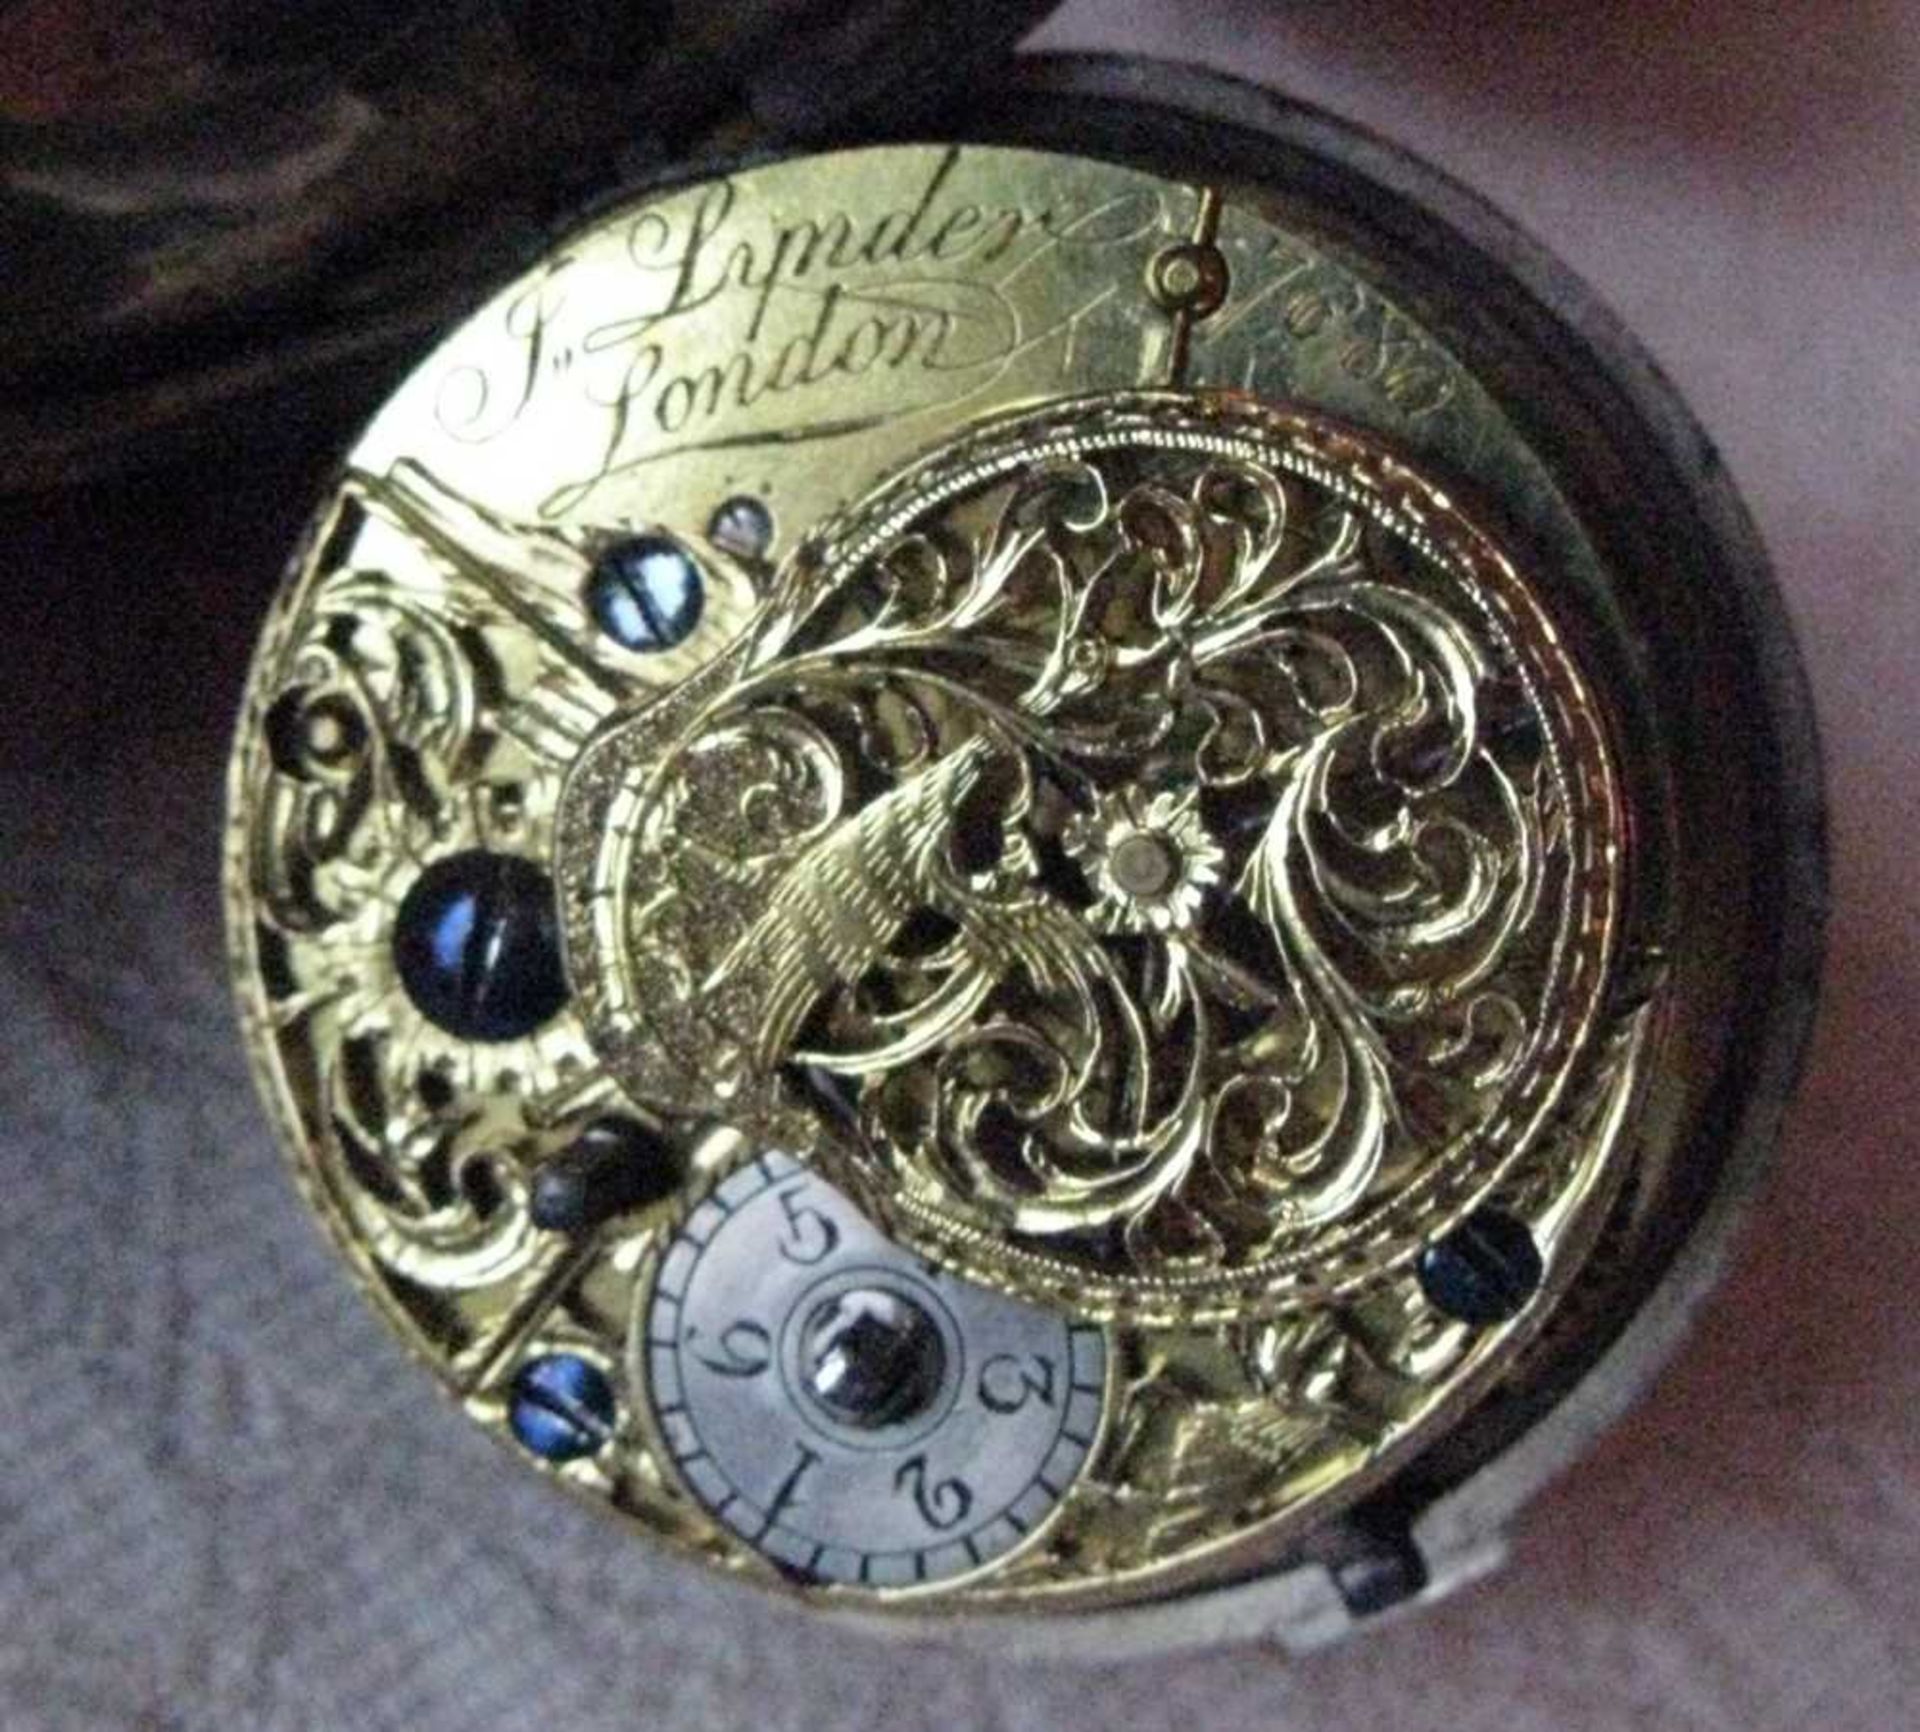 A LATE 18TH CENTURY SILVER PAIR CASED VERGE POCKET WATCH J. LYNDER, LONDON CIRCA 1781 - Image 3 of 3